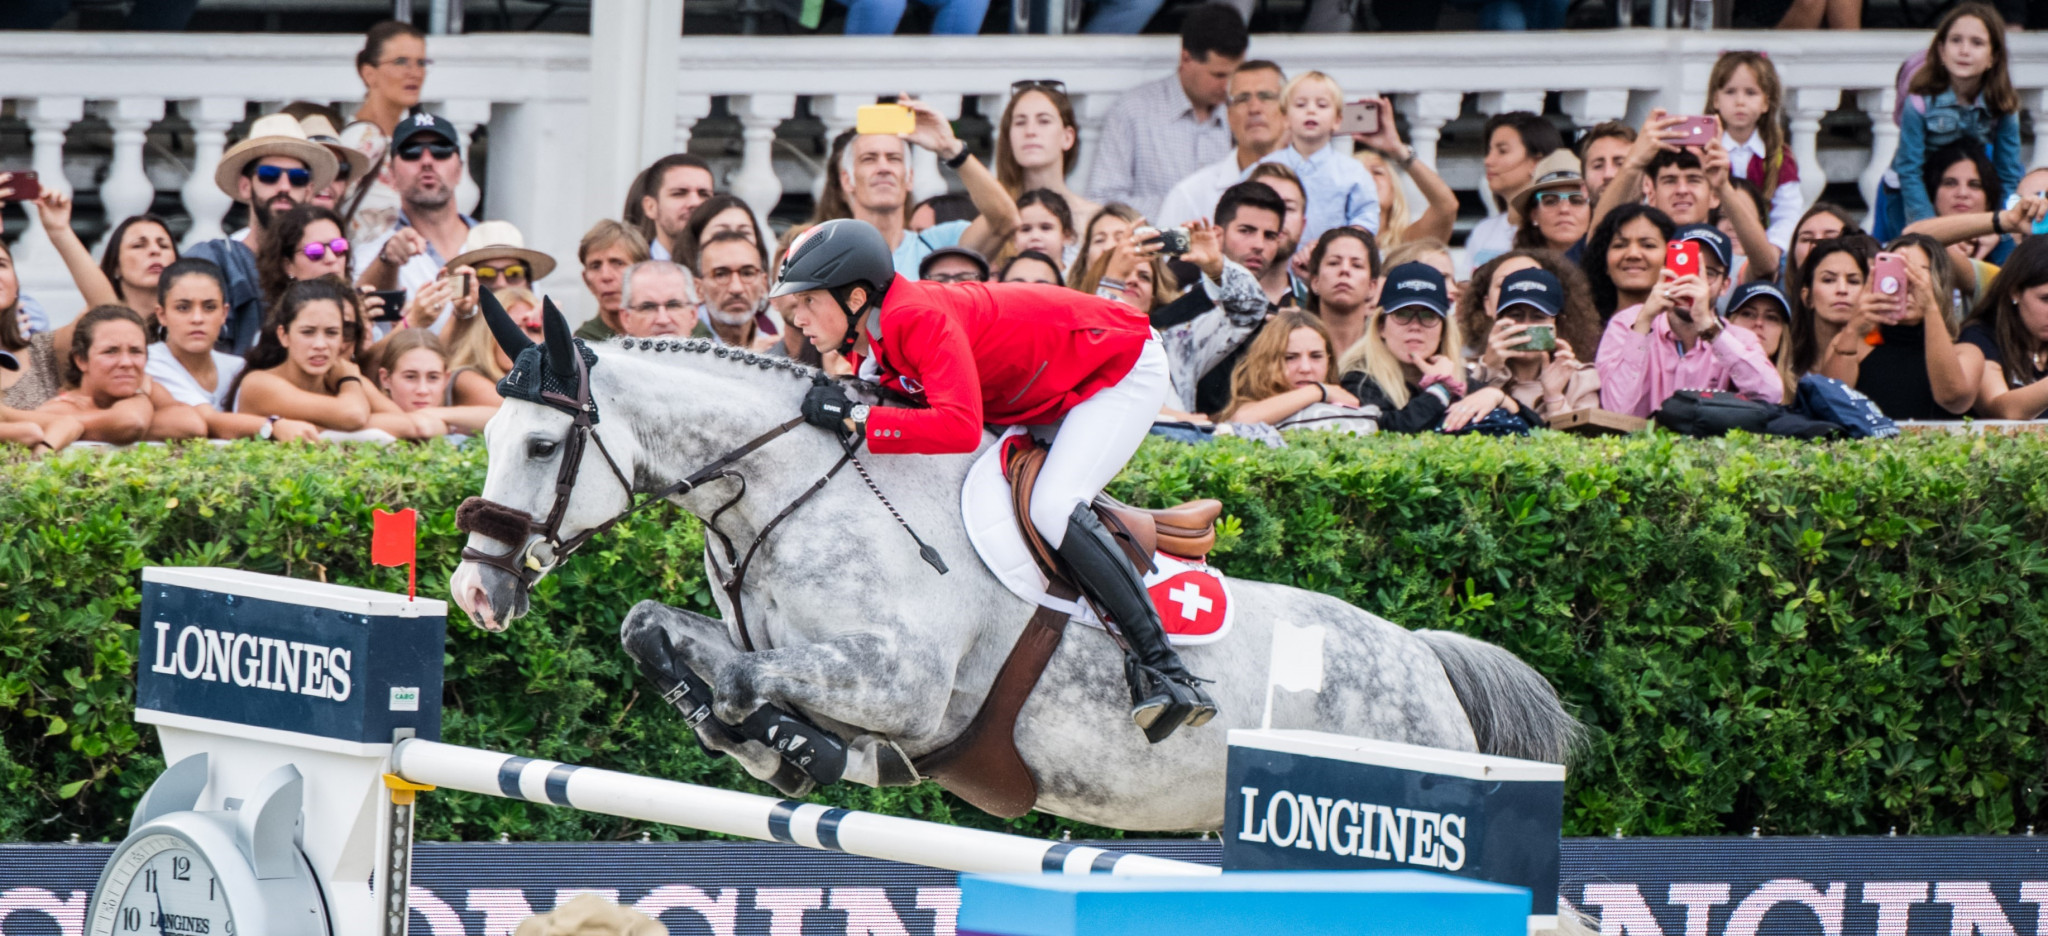 FEI confirms cancellation of 2020 Jumping Nations Cup Final 